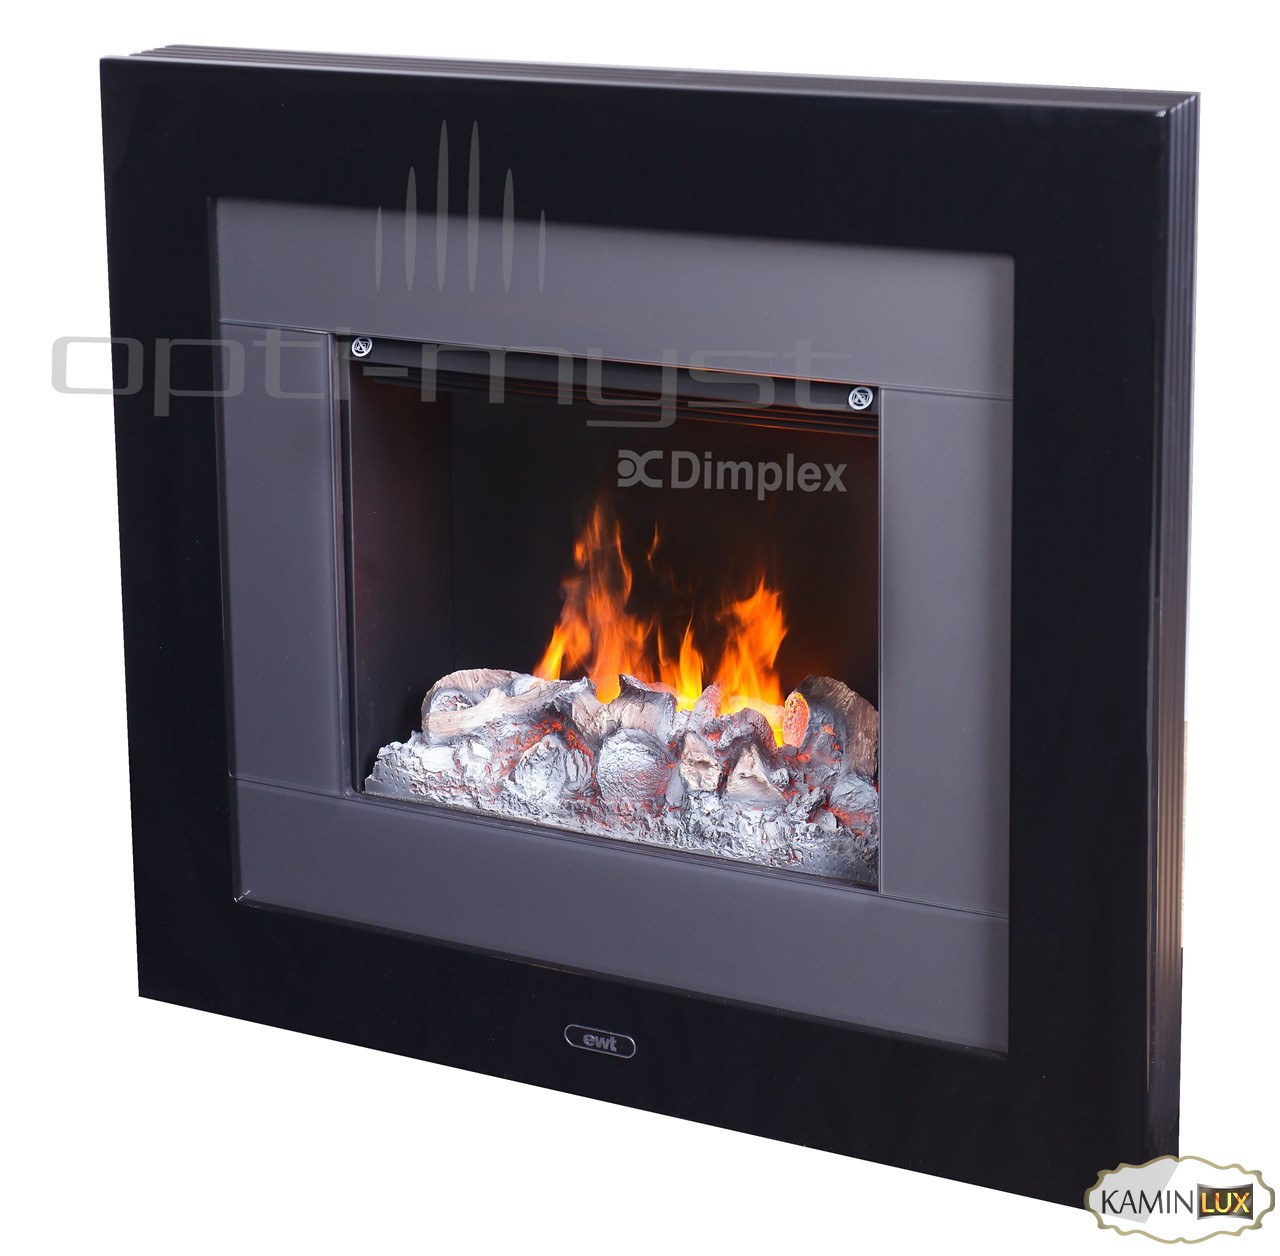 Opti Myst Fireplace Awesome Dimplex Redway – ÐÐ°Ð¼ÑÐ½Ð¸ Ð¢ÐµÑÐ½Ð¾Ð¿ÑÐ Ñ